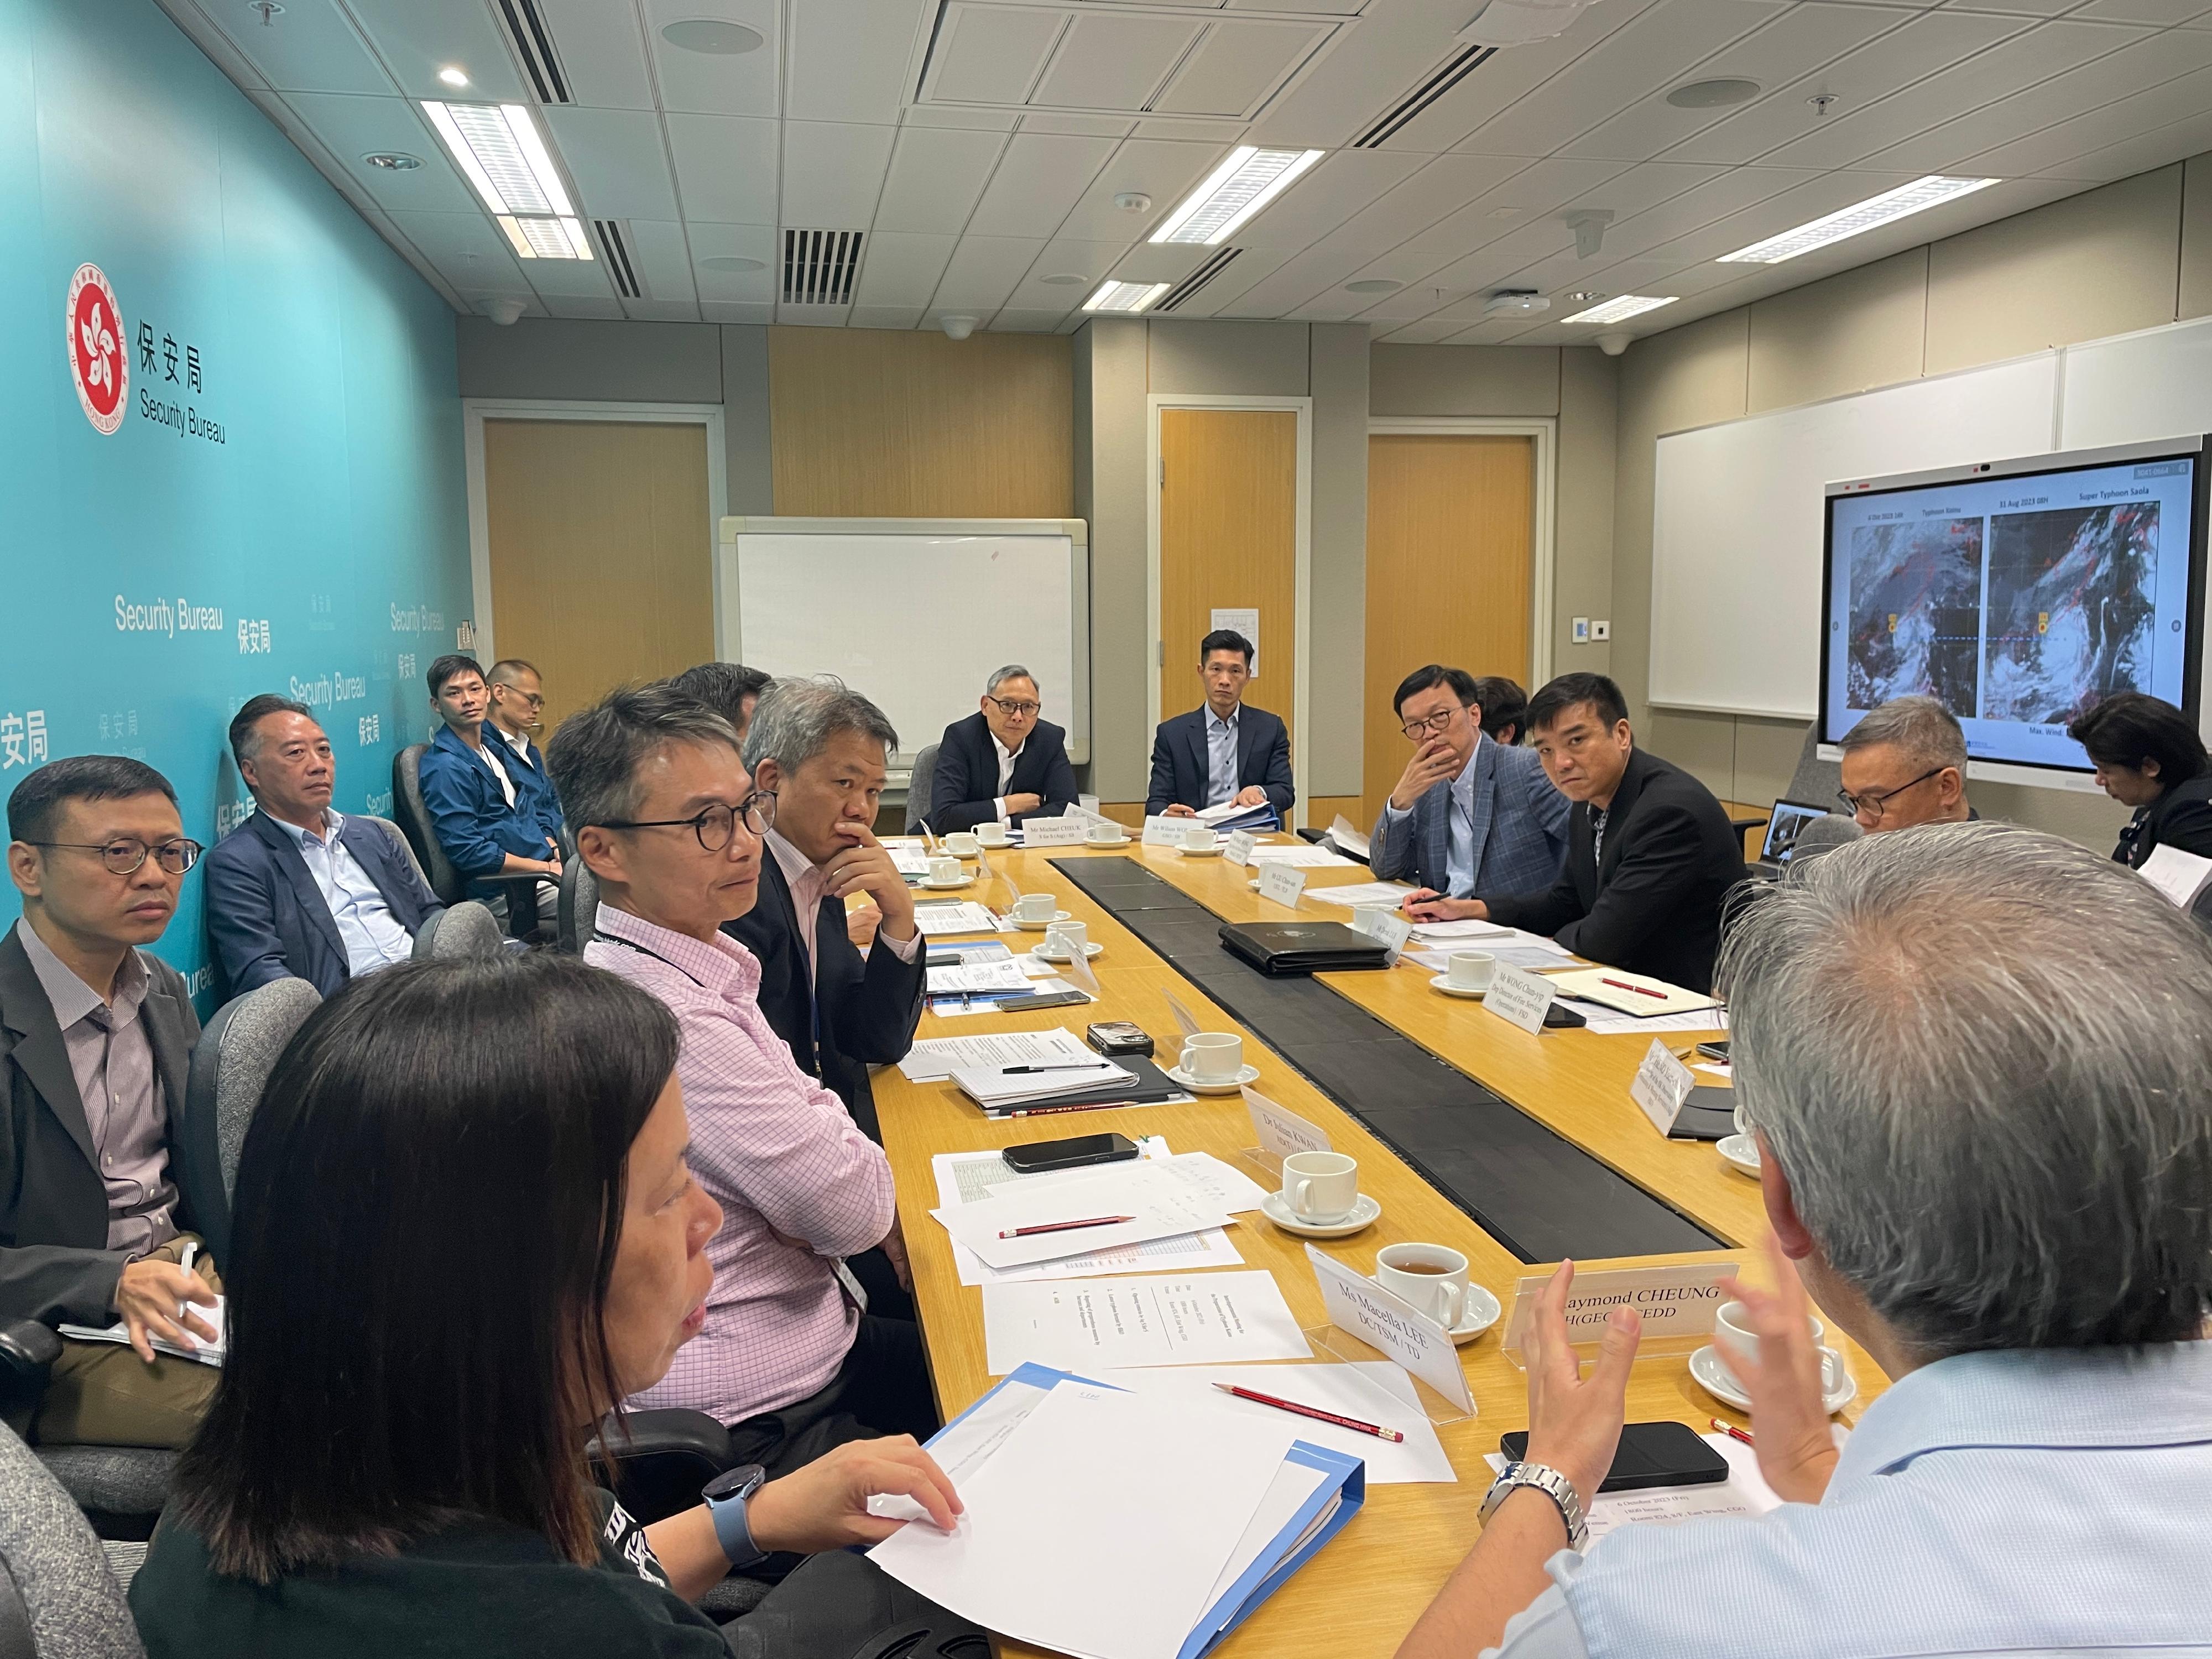 With Typhoon Koinu approaching Hong Kong, the Acting Secretary for Security, Mr Michael Cheuk, chaired an interdepartmental meeting this afternoon (October 6) to co-ordinate the preparatory work of various departments in response to Koinu.